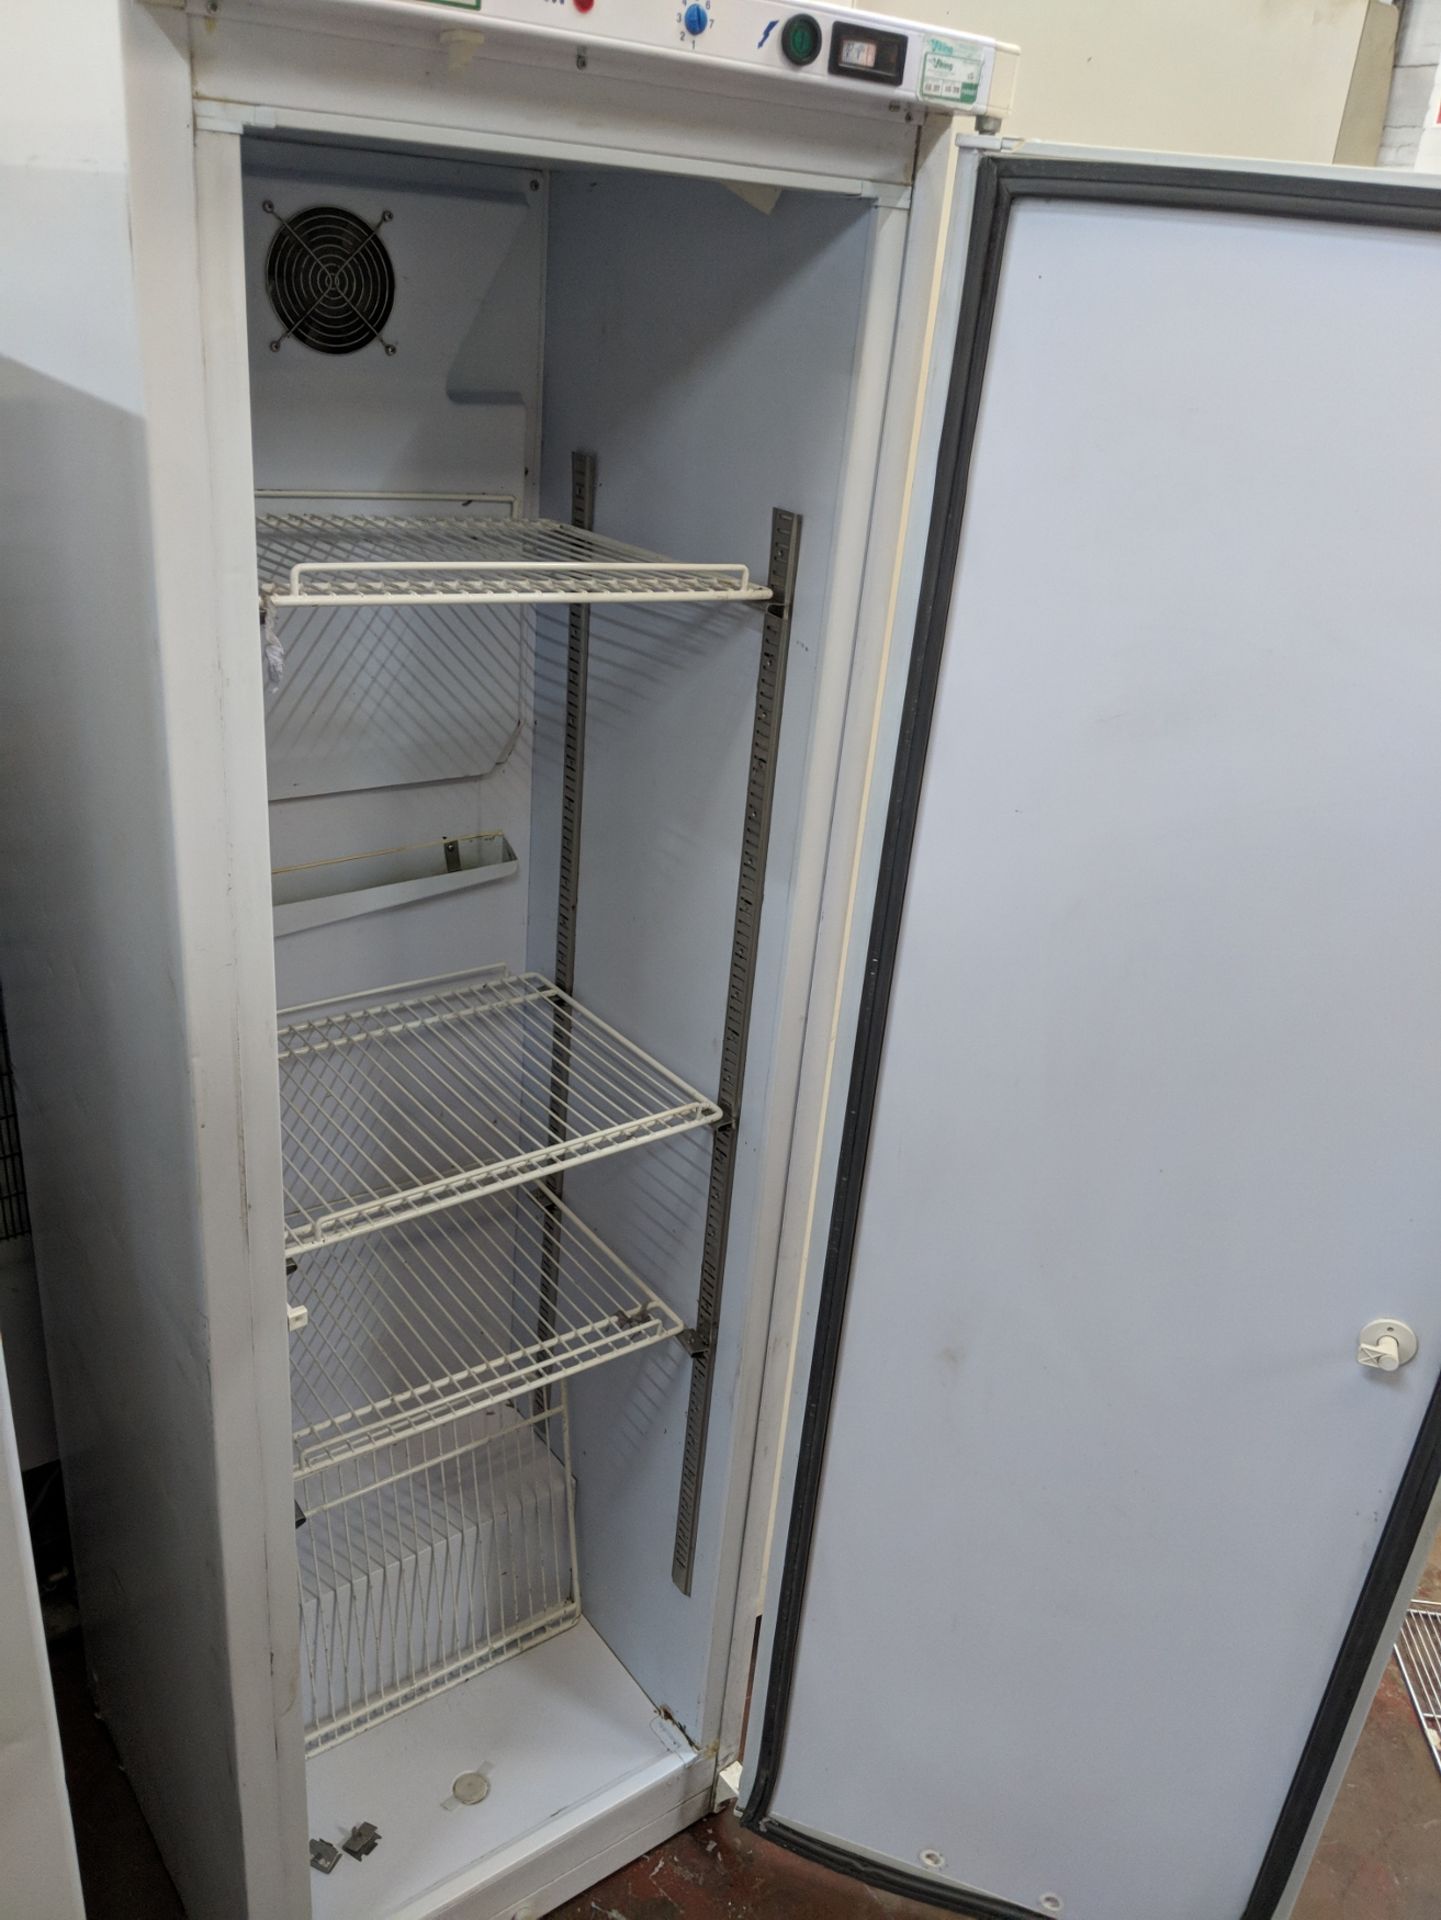 Iarp tall white fridge, model AB400PV IMPORTANT: Please remember goods successfully bid upon must be - Image 2 of 3